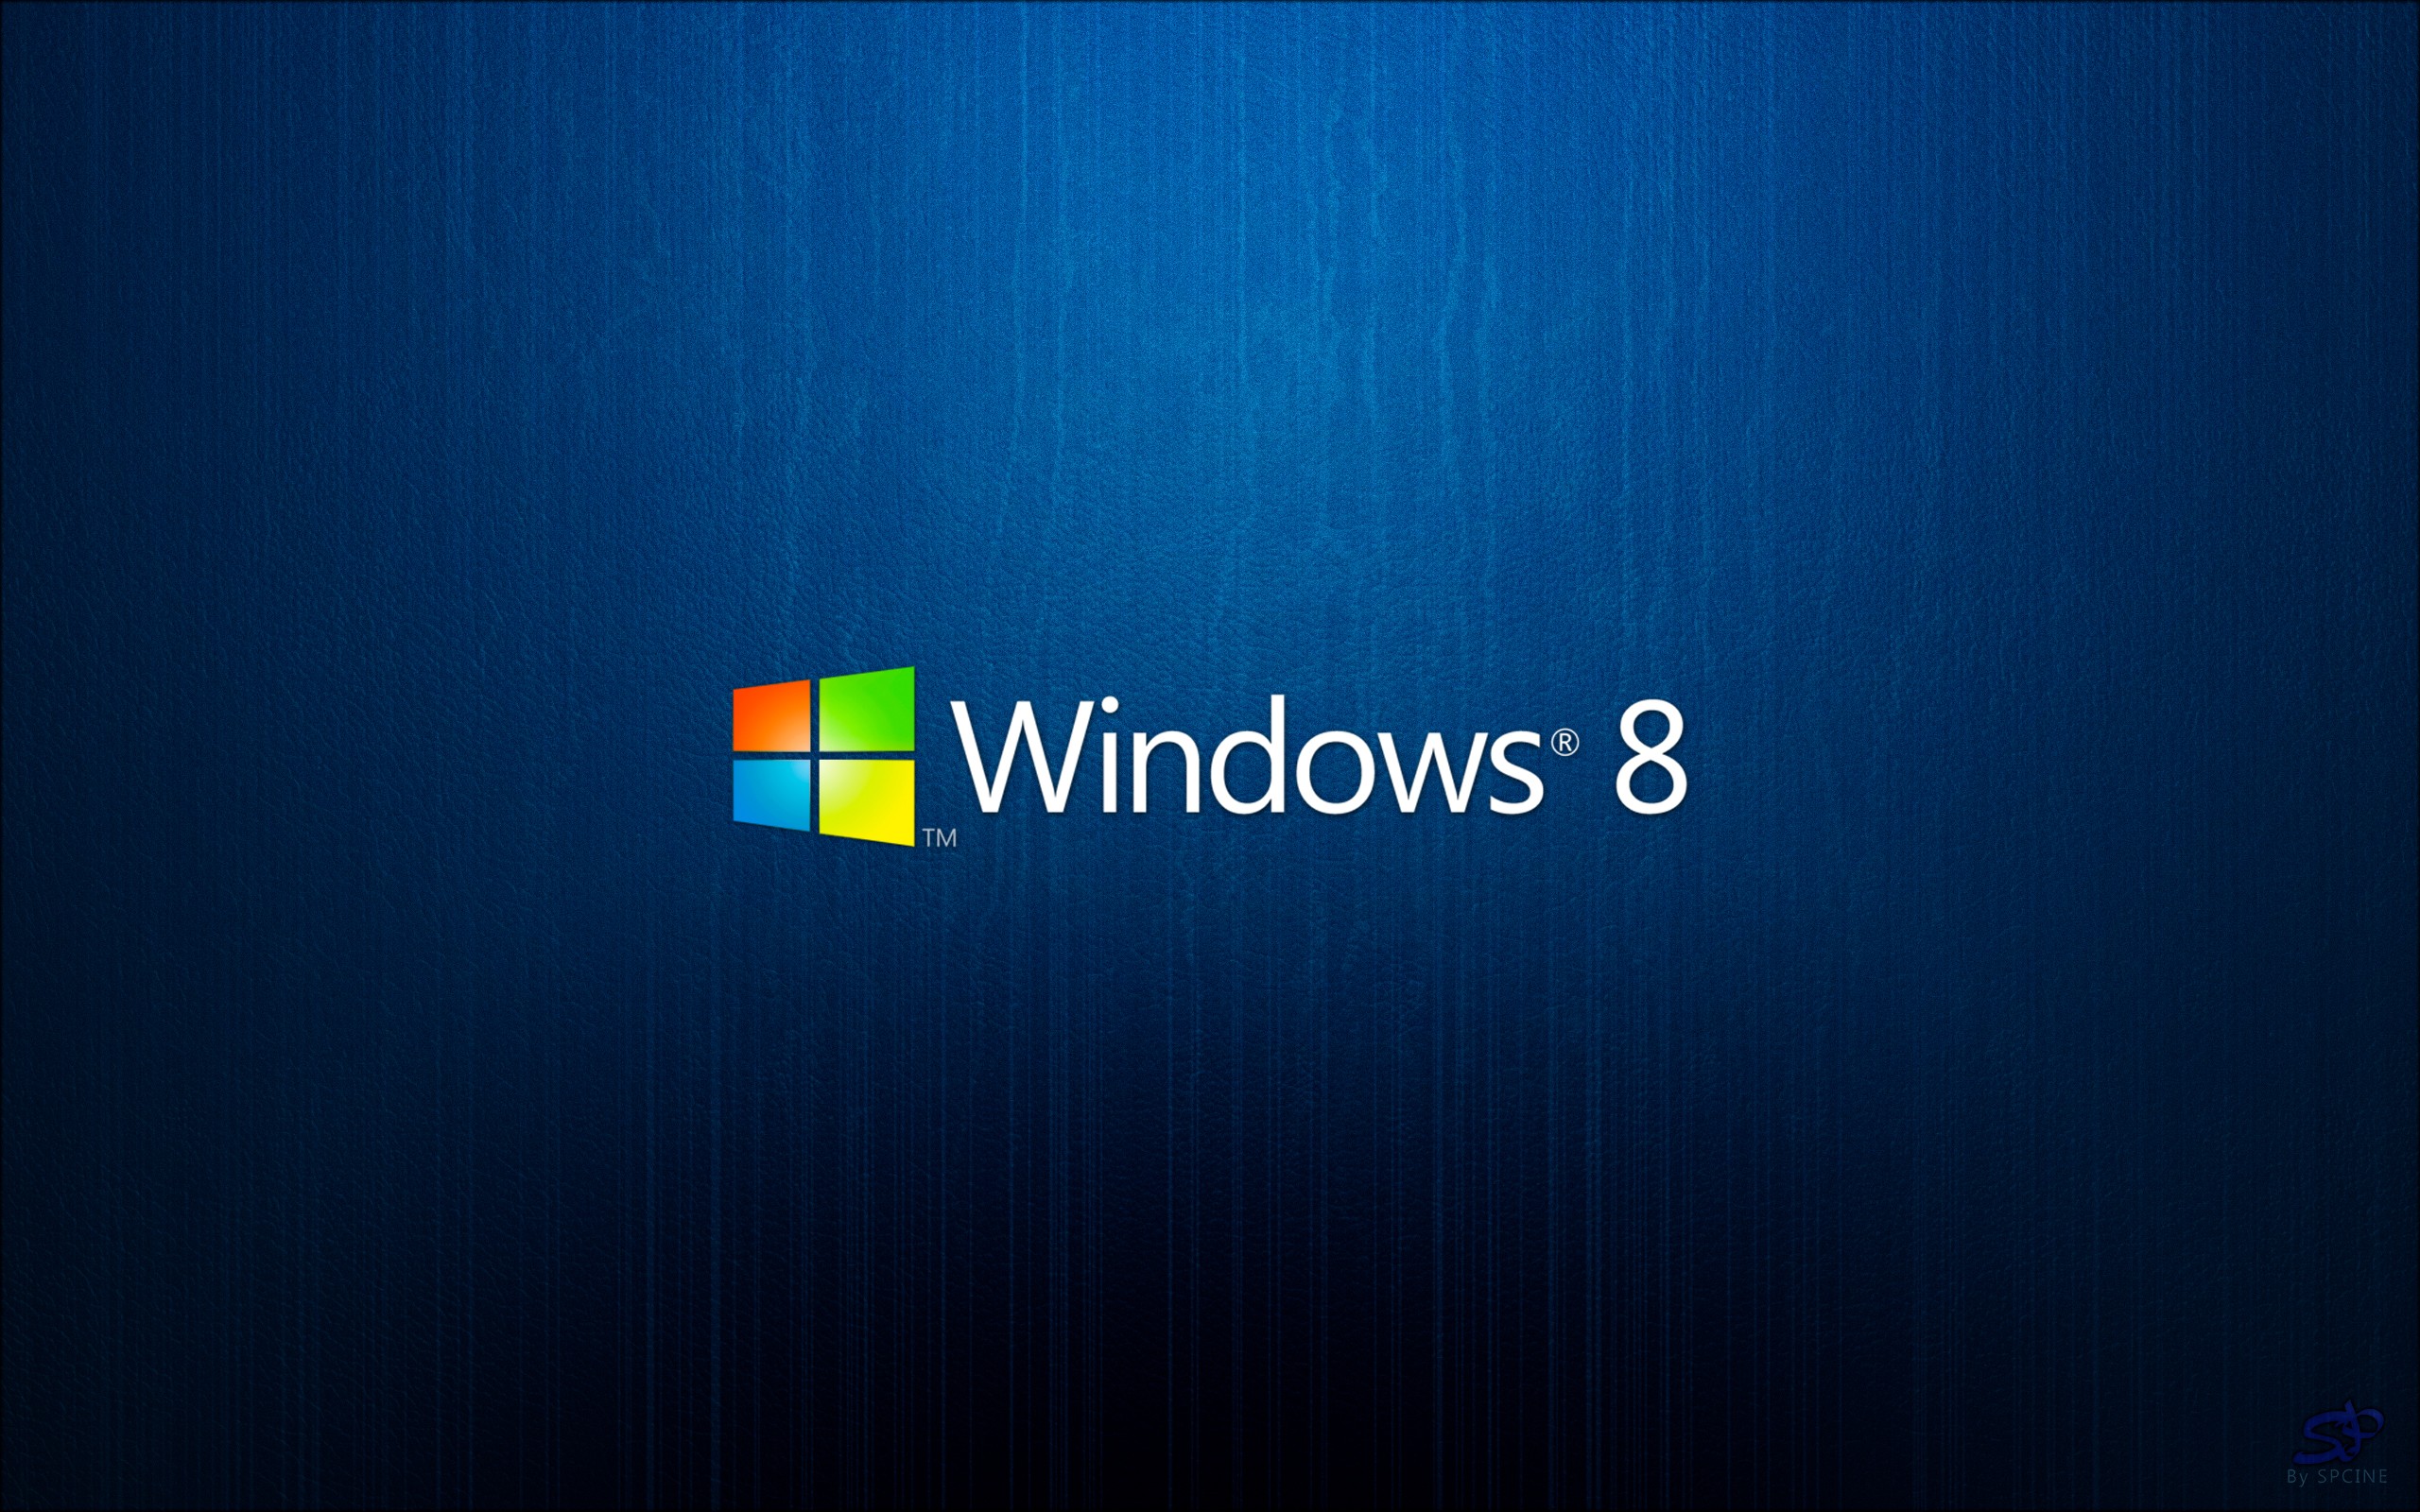 Windows 8 management and maintenance course and training